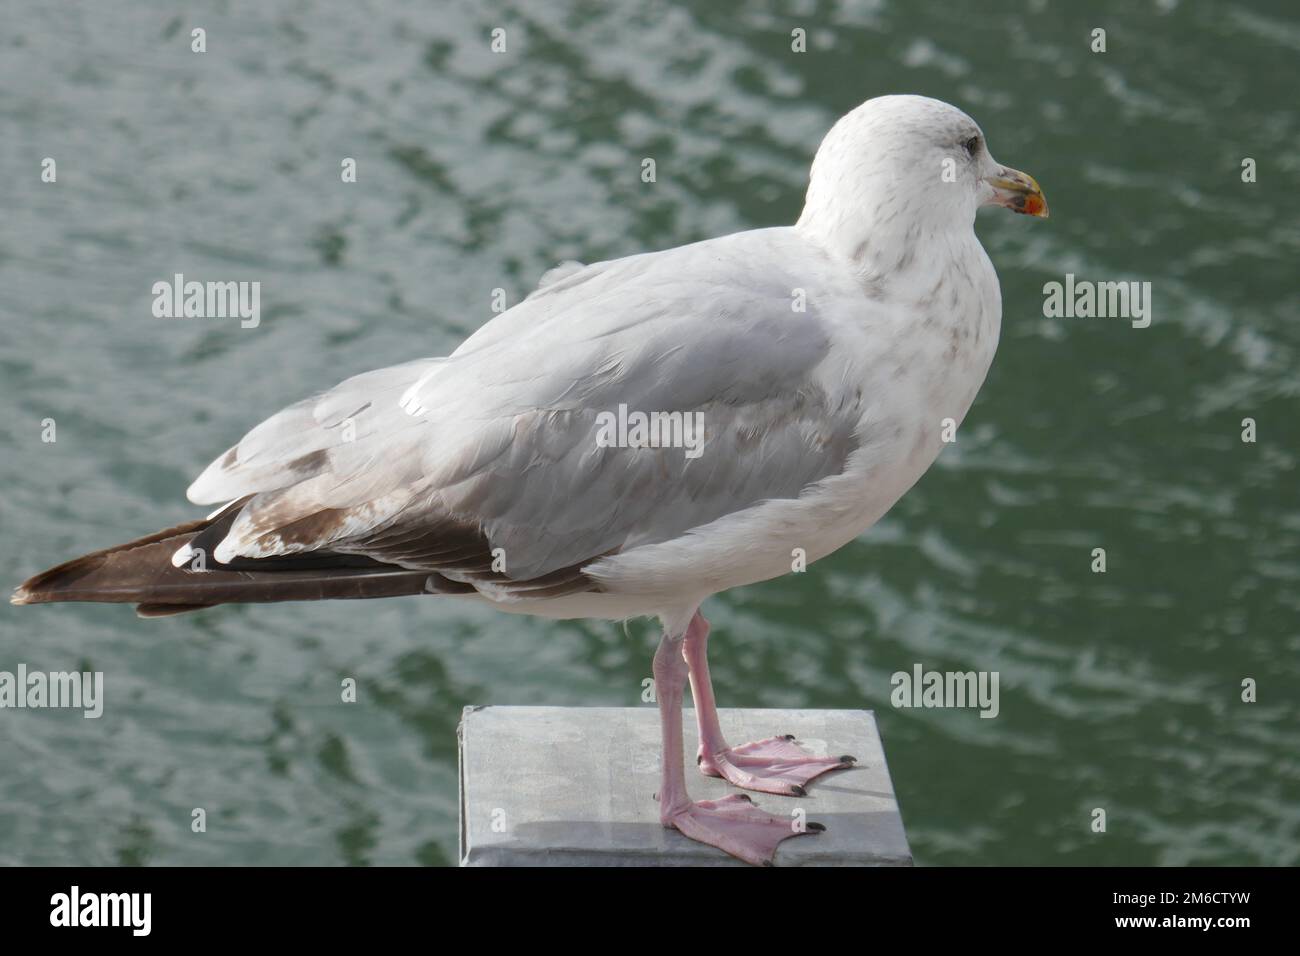 Large seagull perched on post with wavy ocean water in background Stock Photo